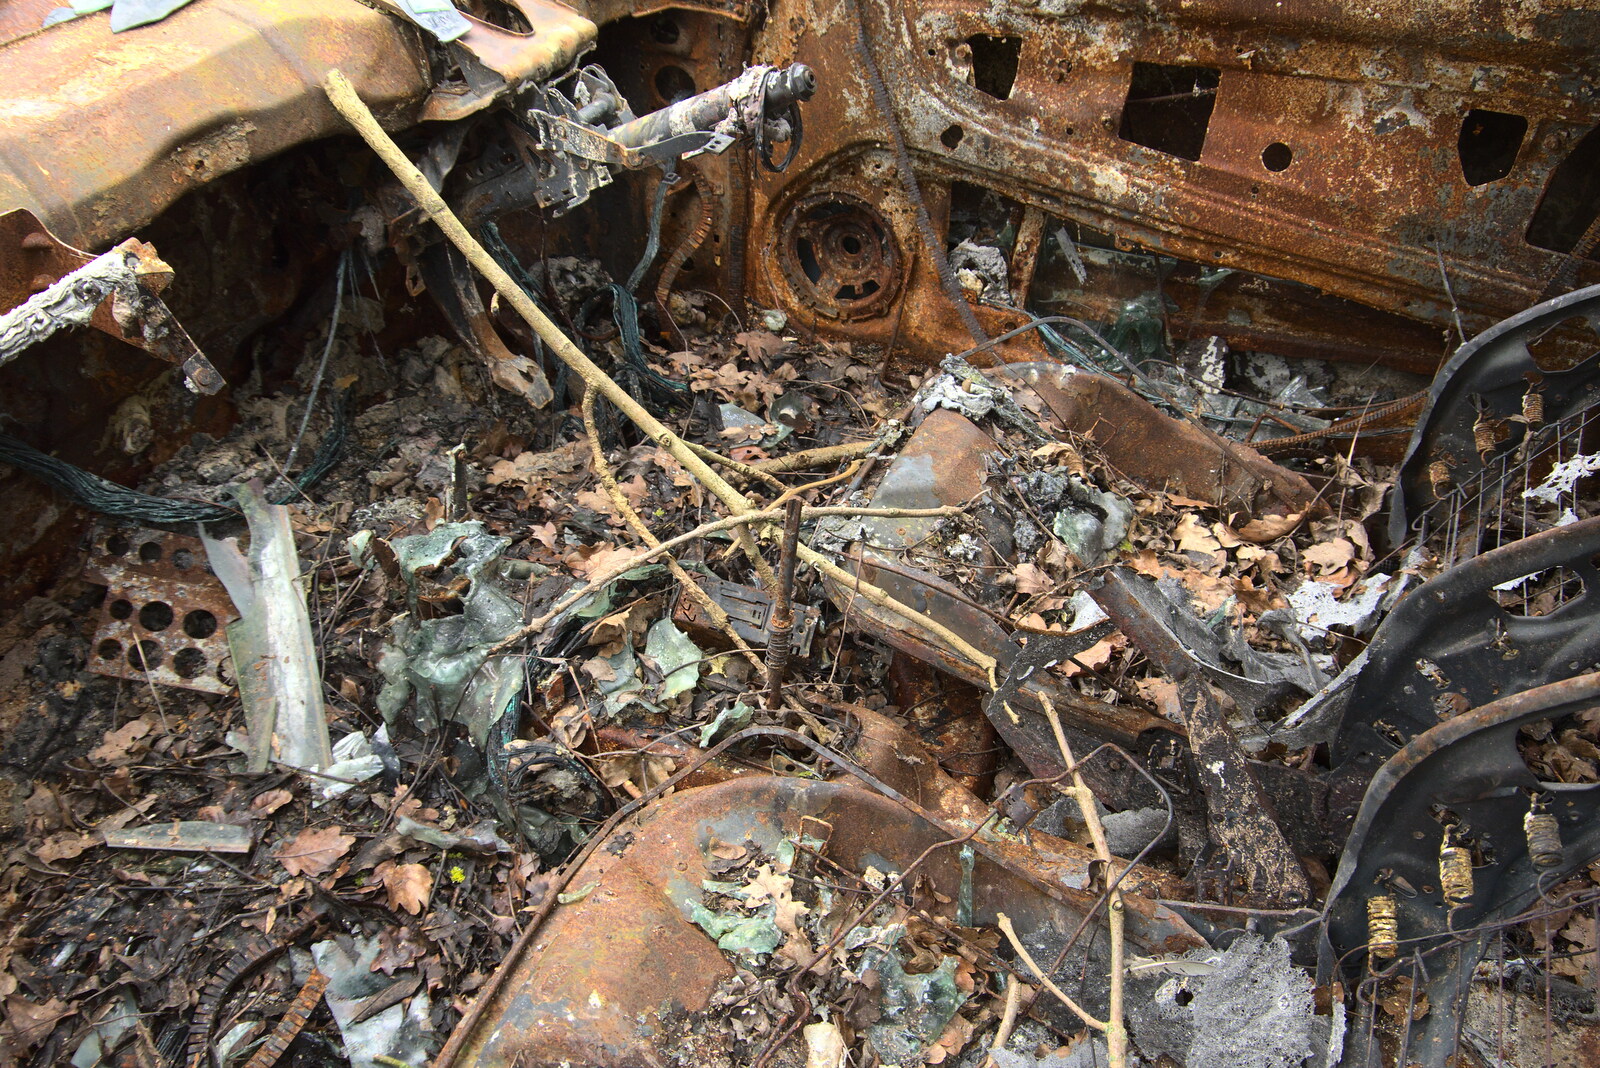 The inside of the torched motor from The Old Sewage Works, The Avenue, Brome, Suffolk - 20th February 2021